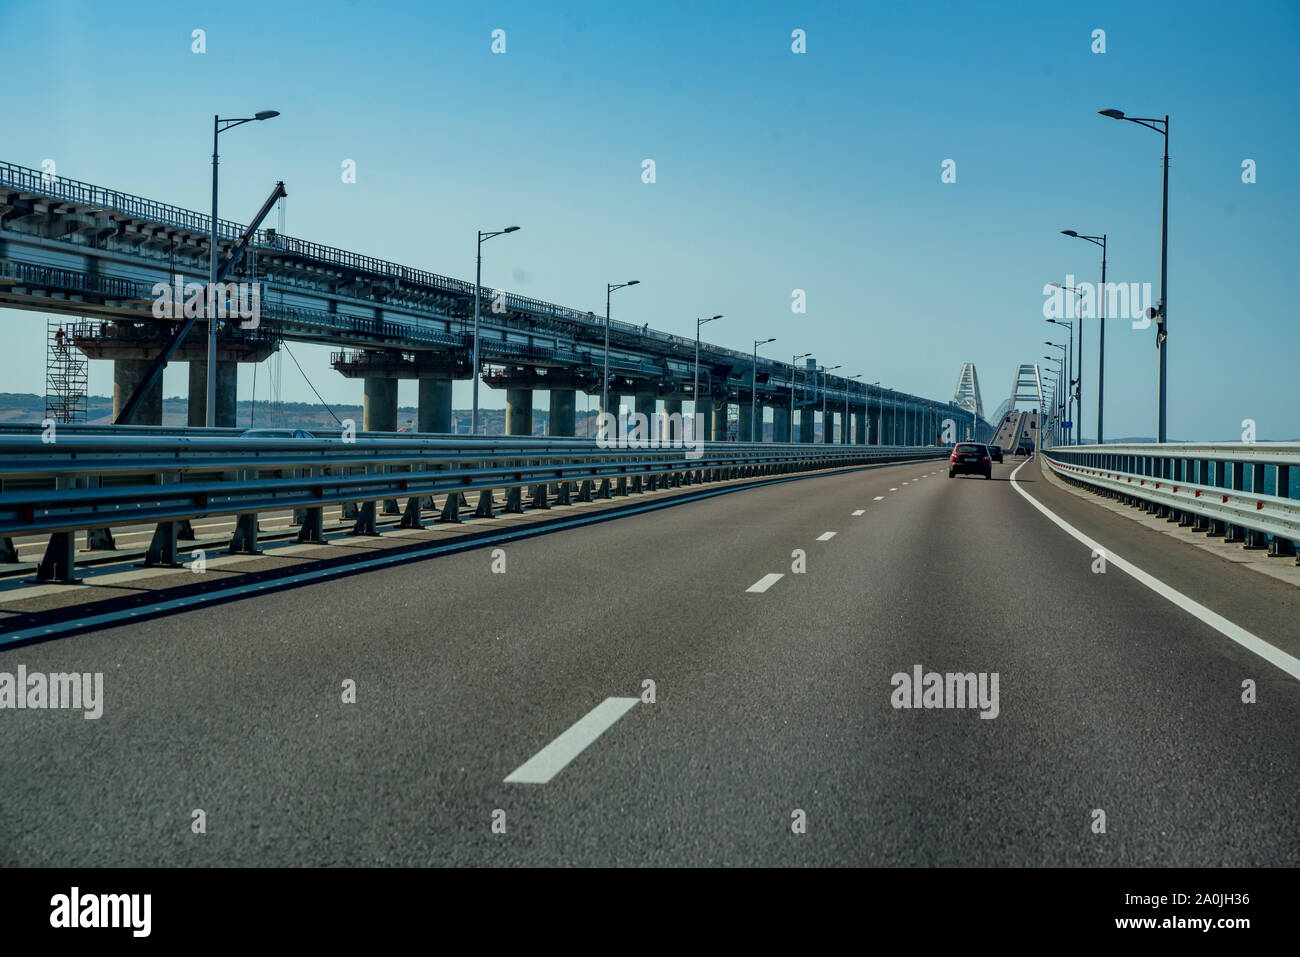 KERCH, RUSSIA - 5 AUGUST 2019: Cars go on the Crimean automobile bridge connecting the banks of the Kerch Strait: Taman and Kerch. Sunny summer day Stock Photo